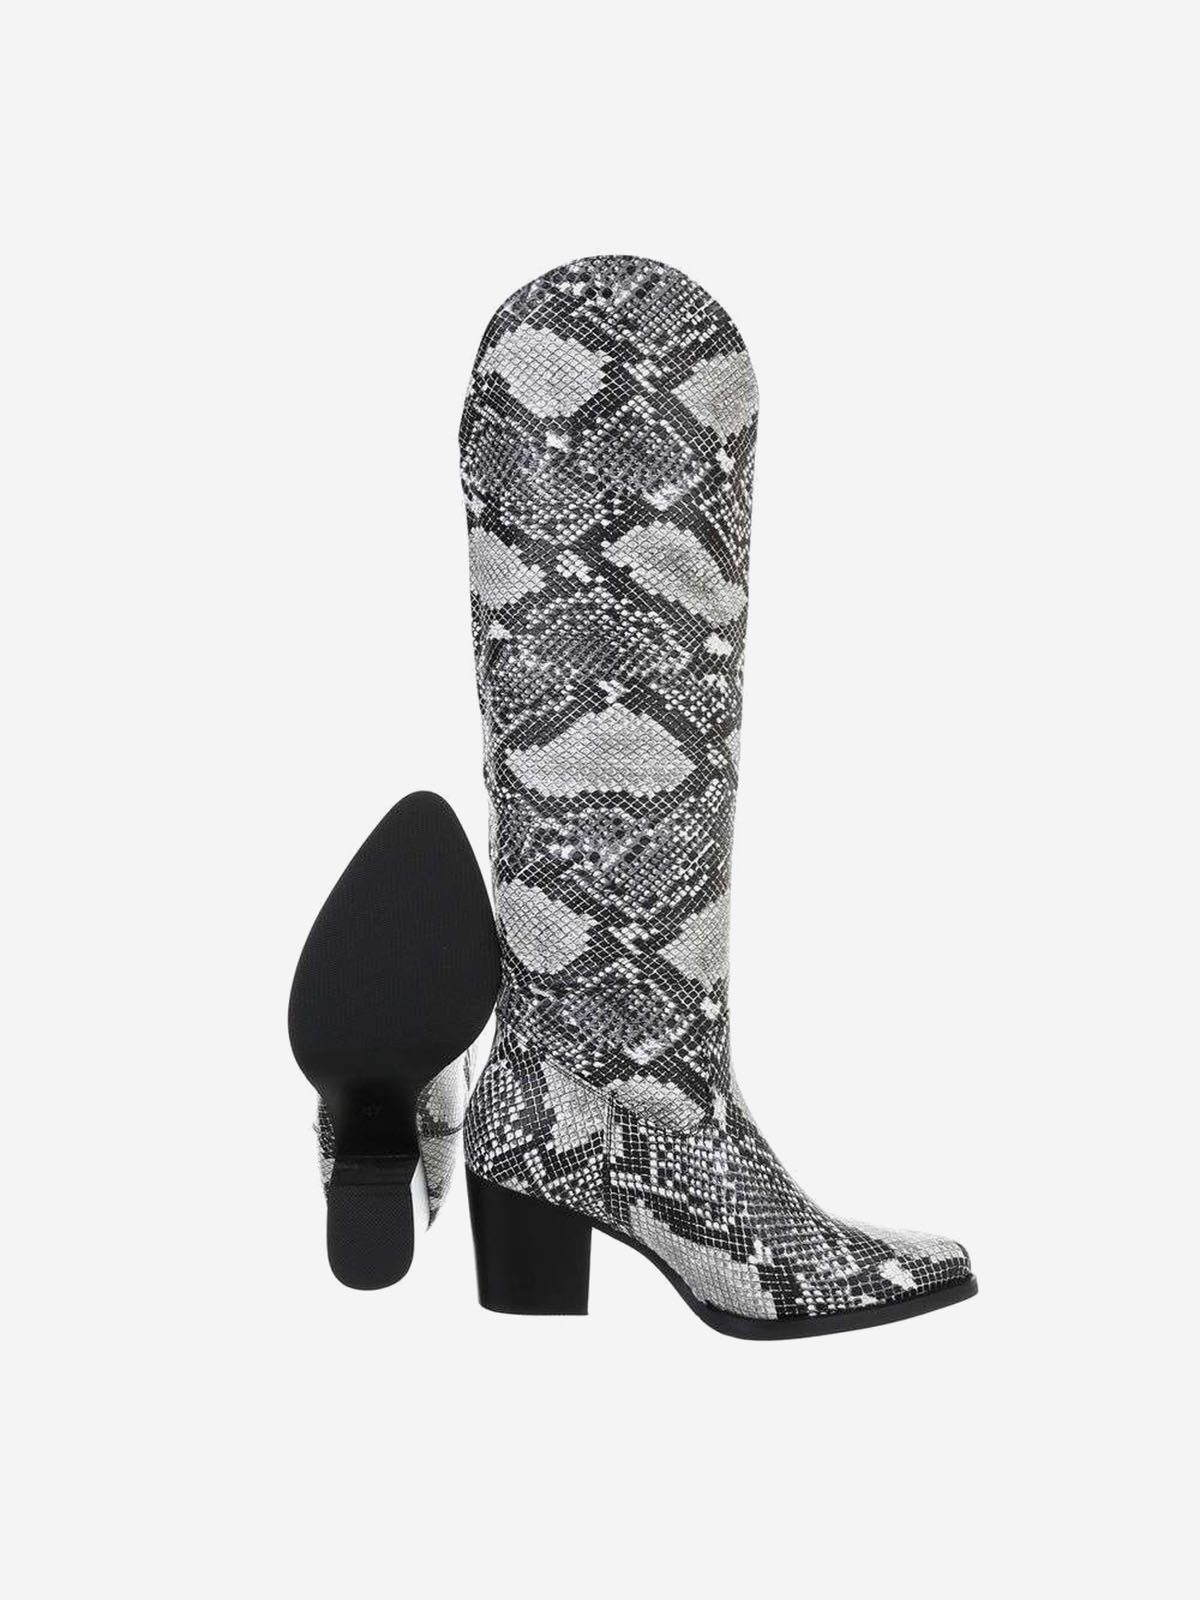 Western style women's high-heeled boots with snake skin pattern